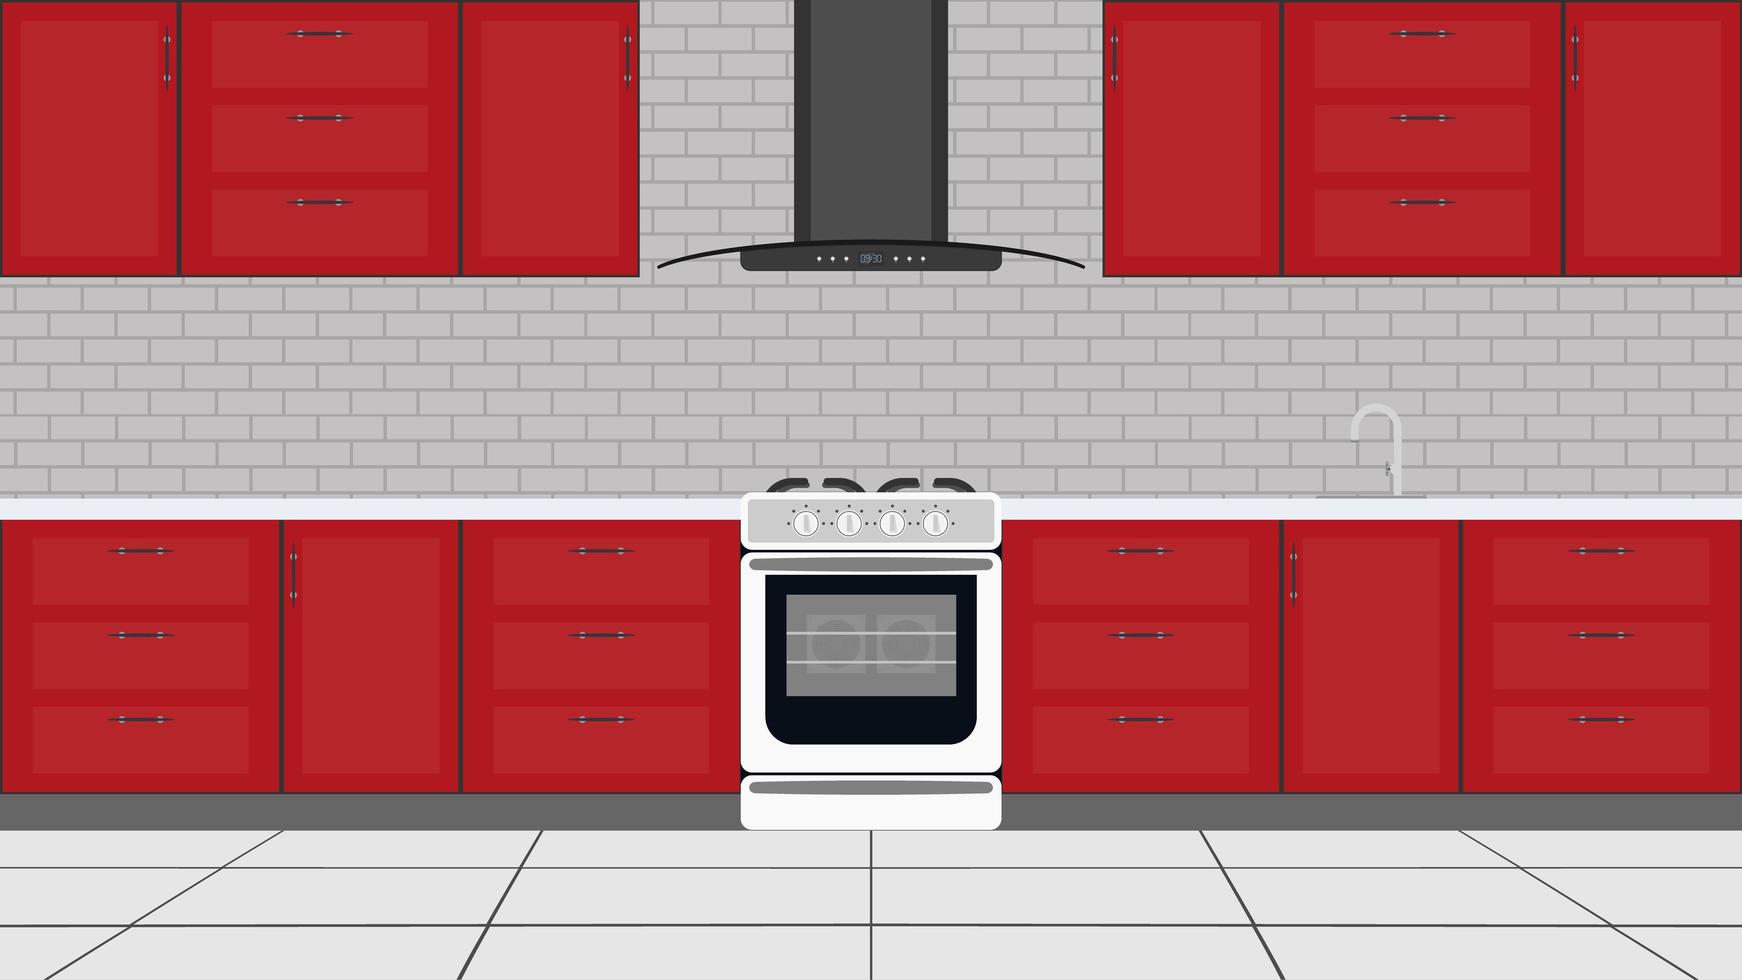 Stylish kitchen in a flat style. Red Kitchen Cabinets, Stove, Oven. Vector. vector